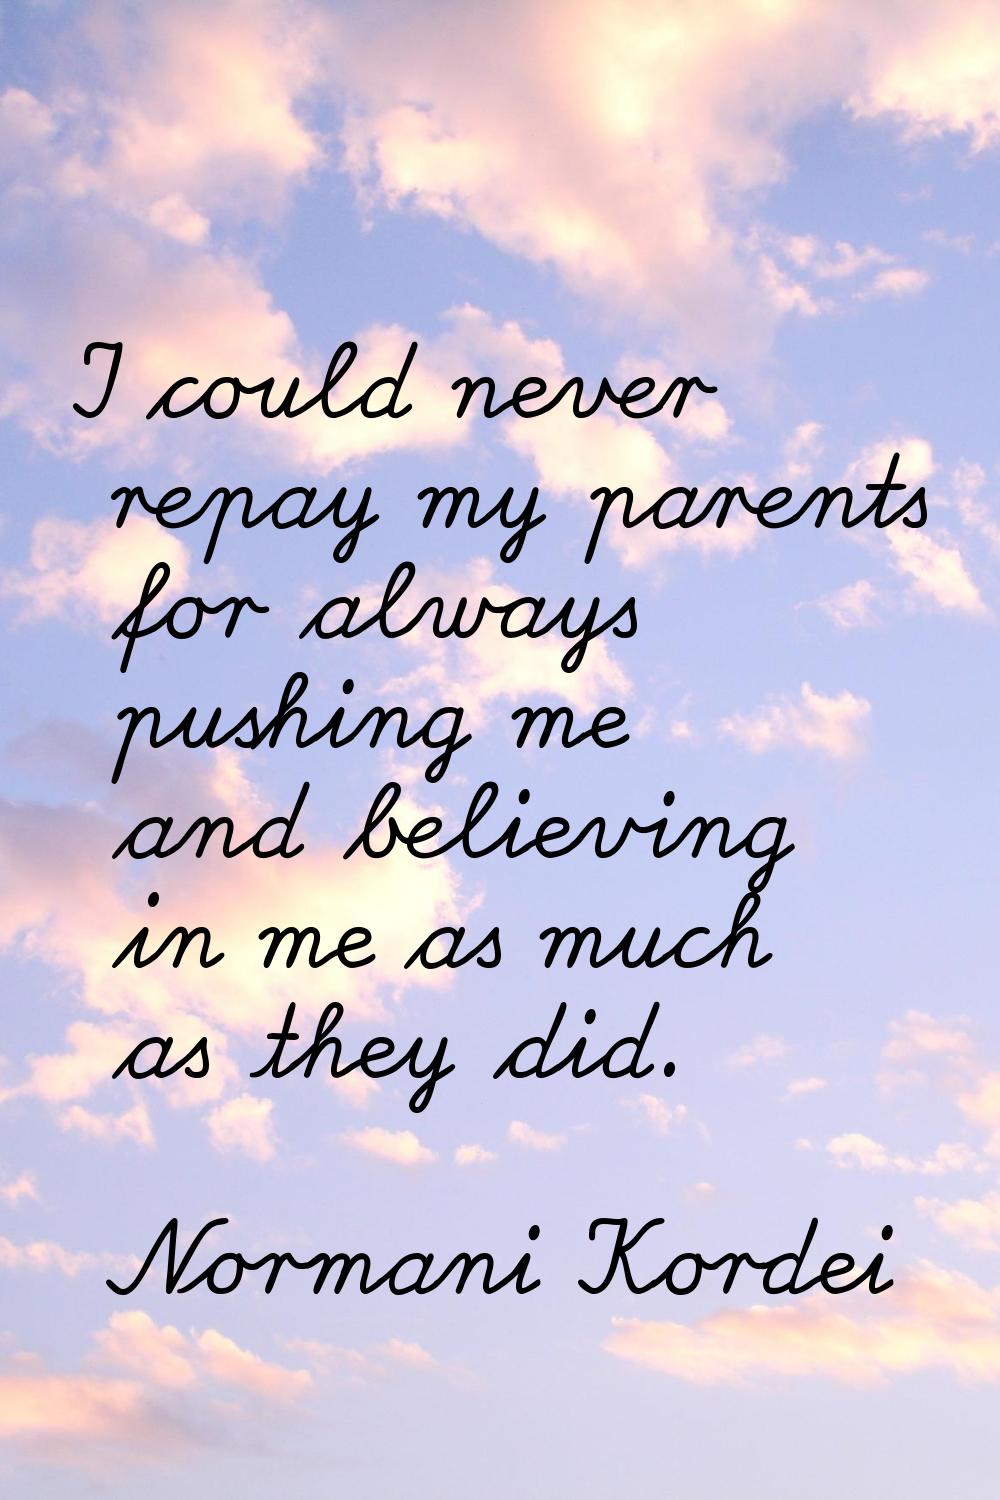 I could never repay my parents for always pushing me and believing in me as much as they did.